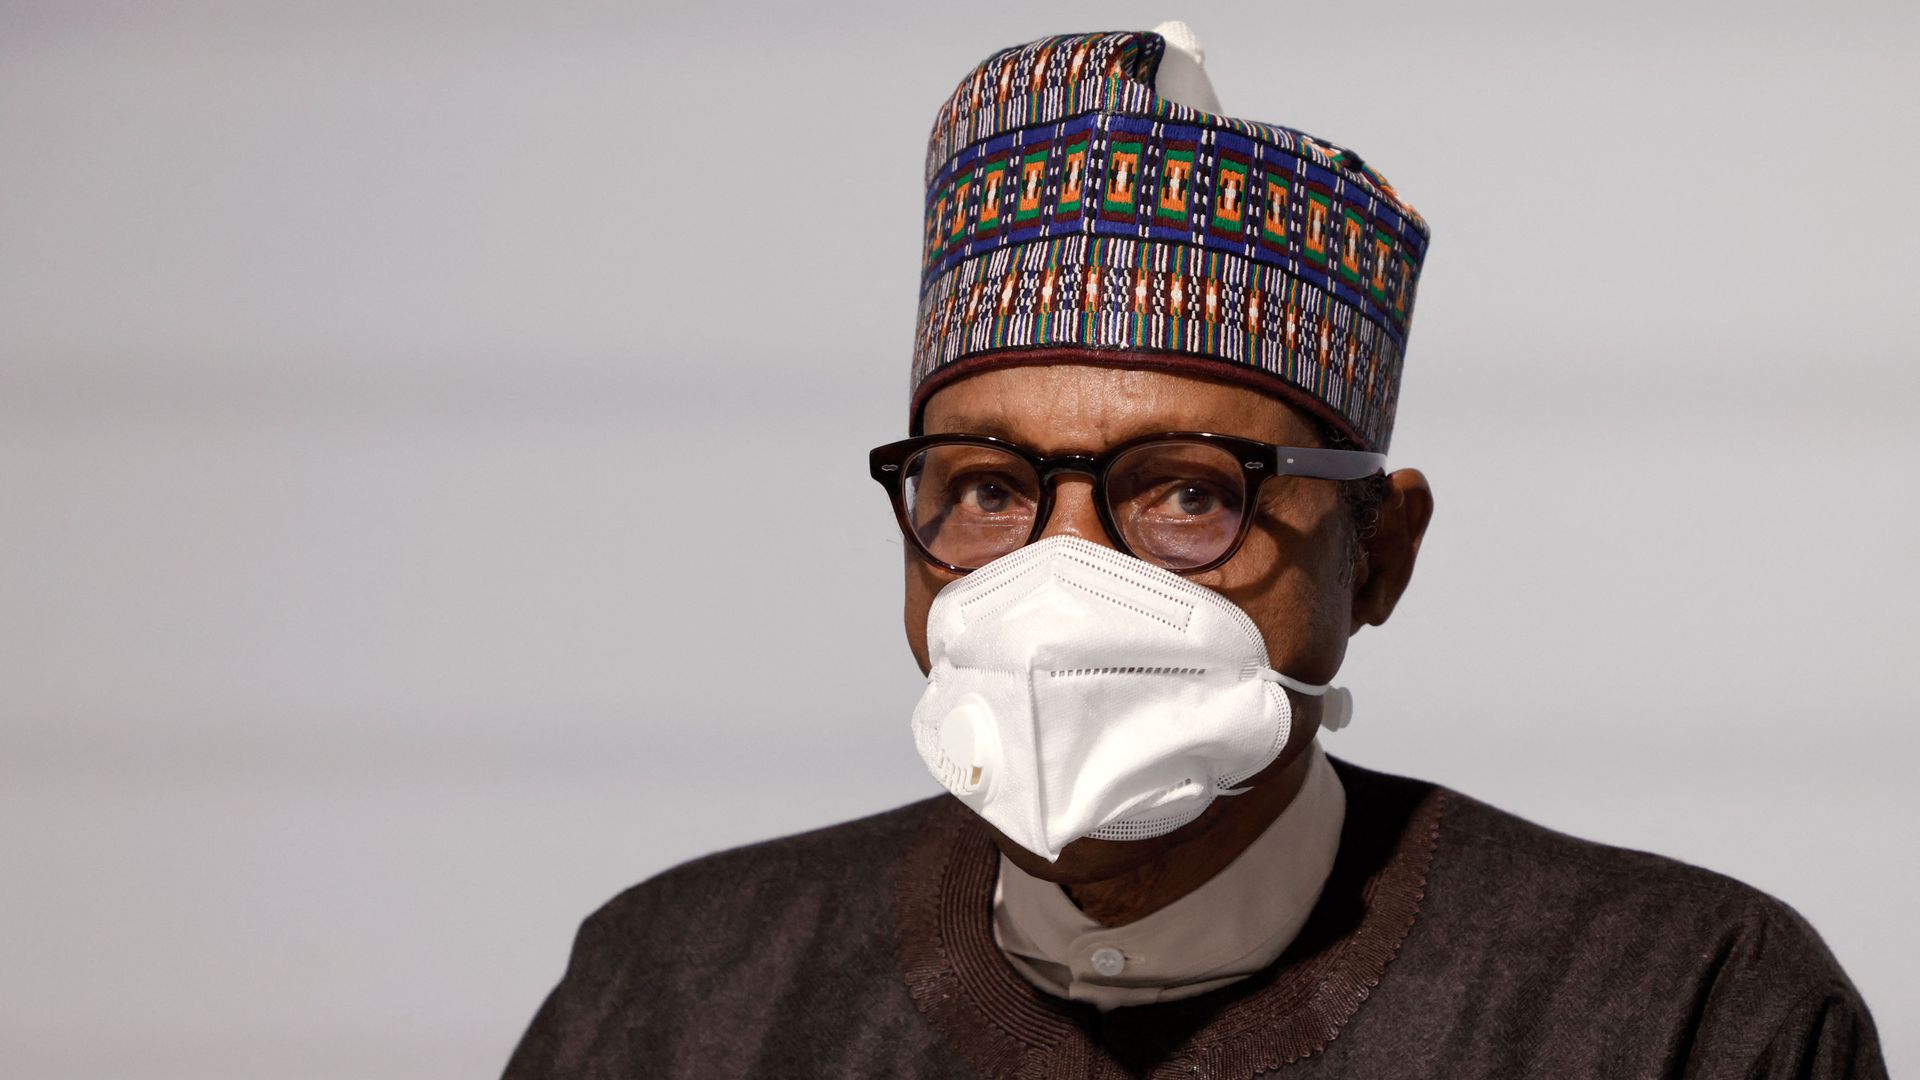 Nigeria's President Muhammadu Buhari during a conference in Paris in May 2021.